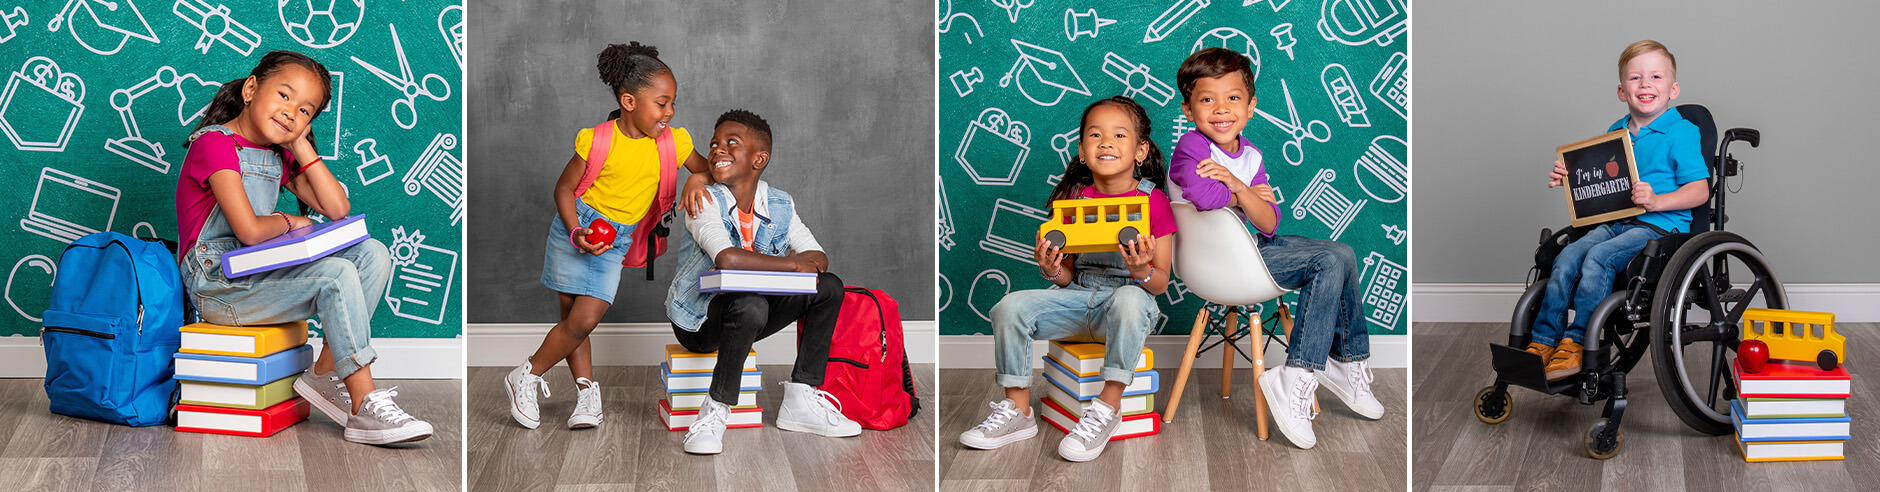 Back to Schoool imagery featured on the new School Days background at JCPenney Portraits.